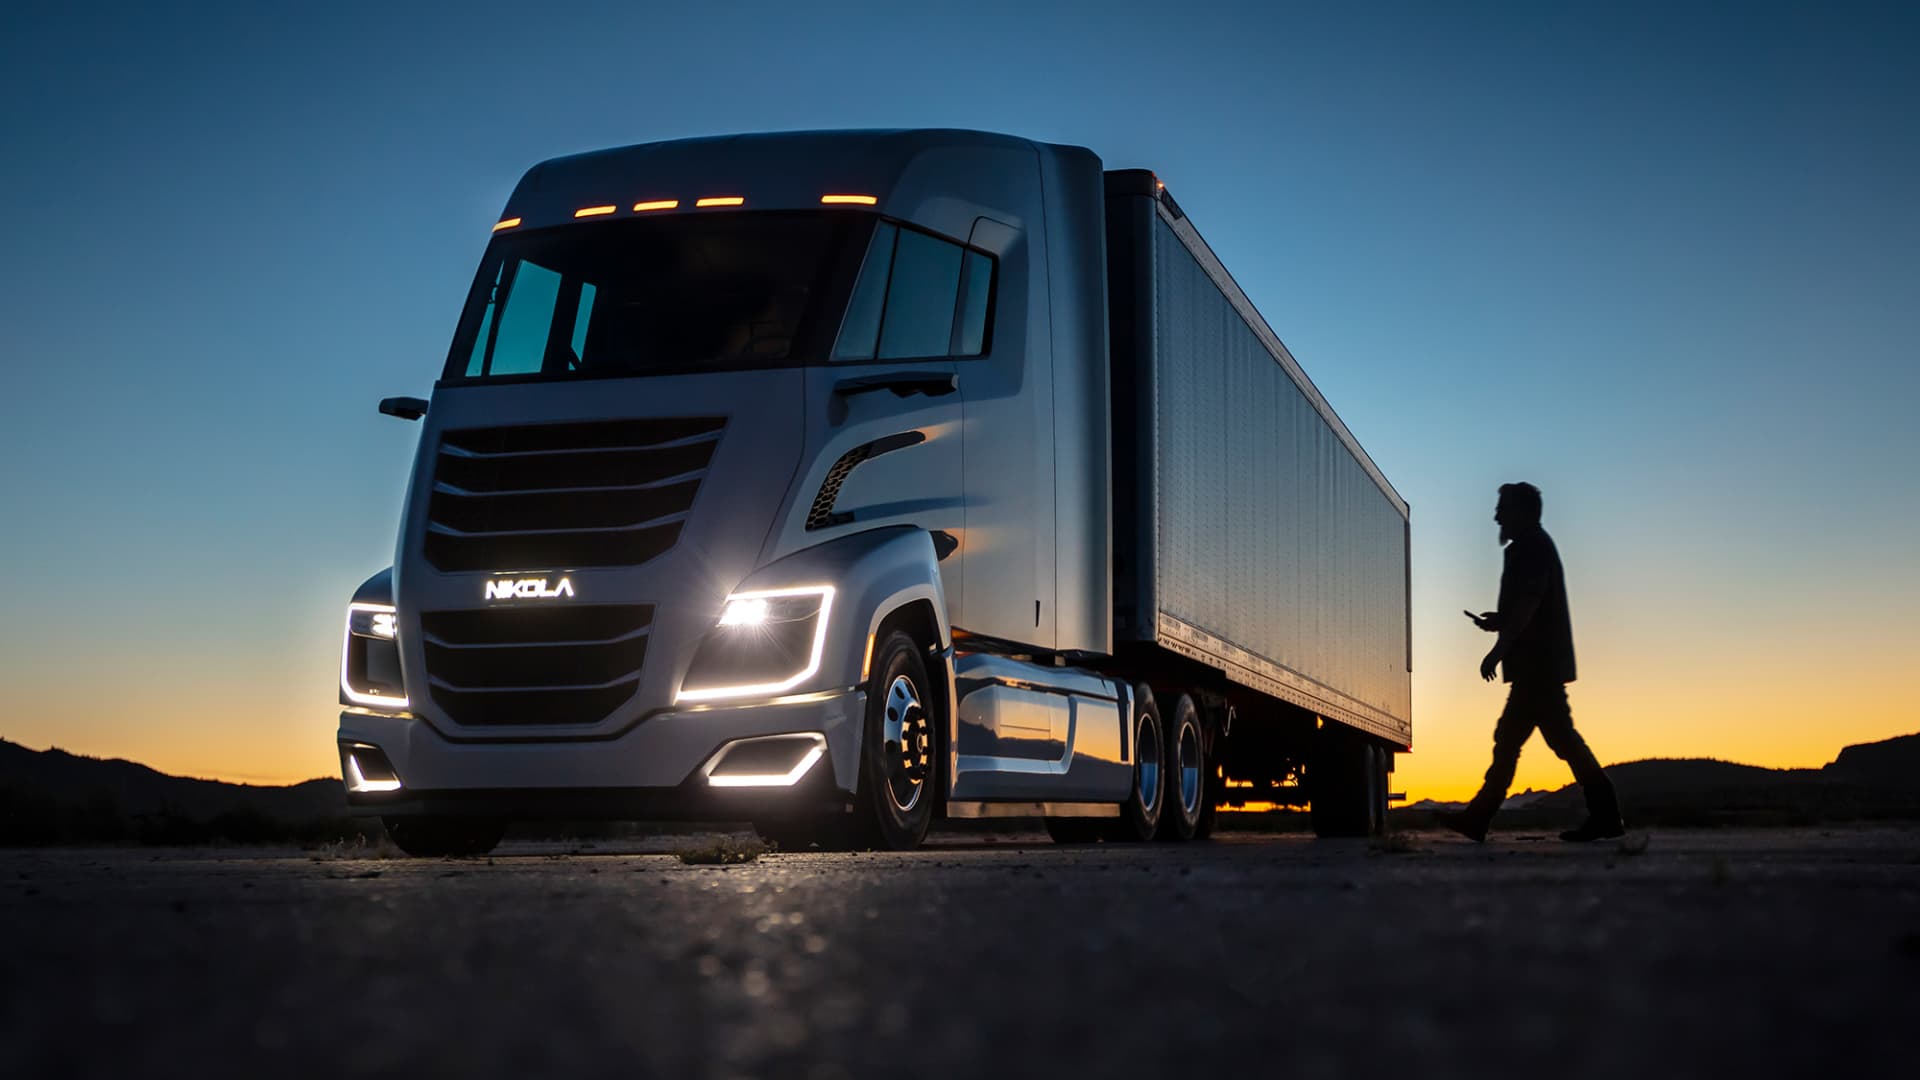 Nikola will offer a driver-assist system for its trucks starting next year Auto Recent